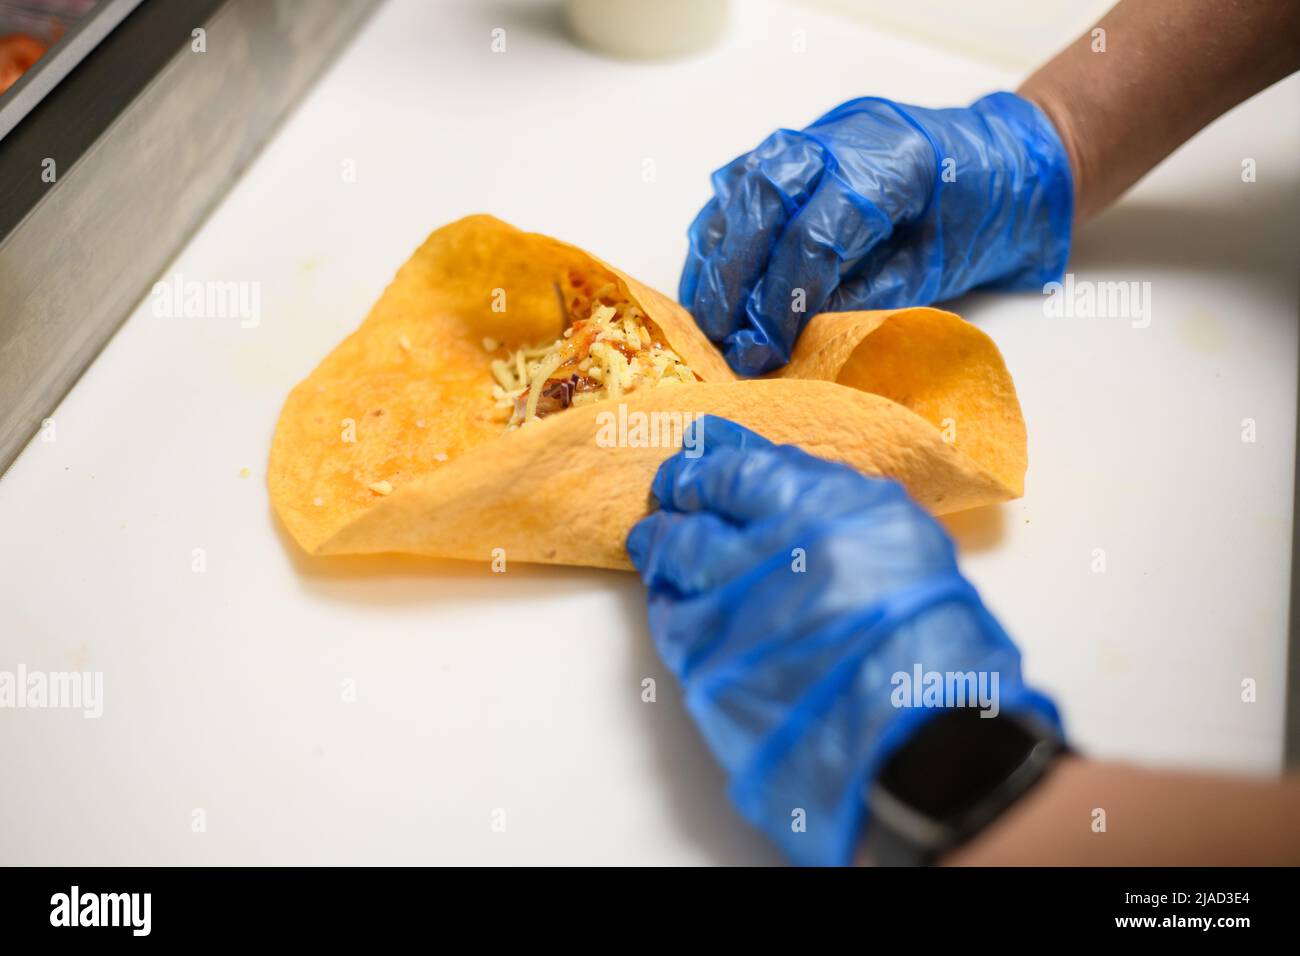 Close-Up of a person wearing disposable protective gloves preparing a tortilla wrap with chicken, cheese, onion and chili sauce Stock Photo